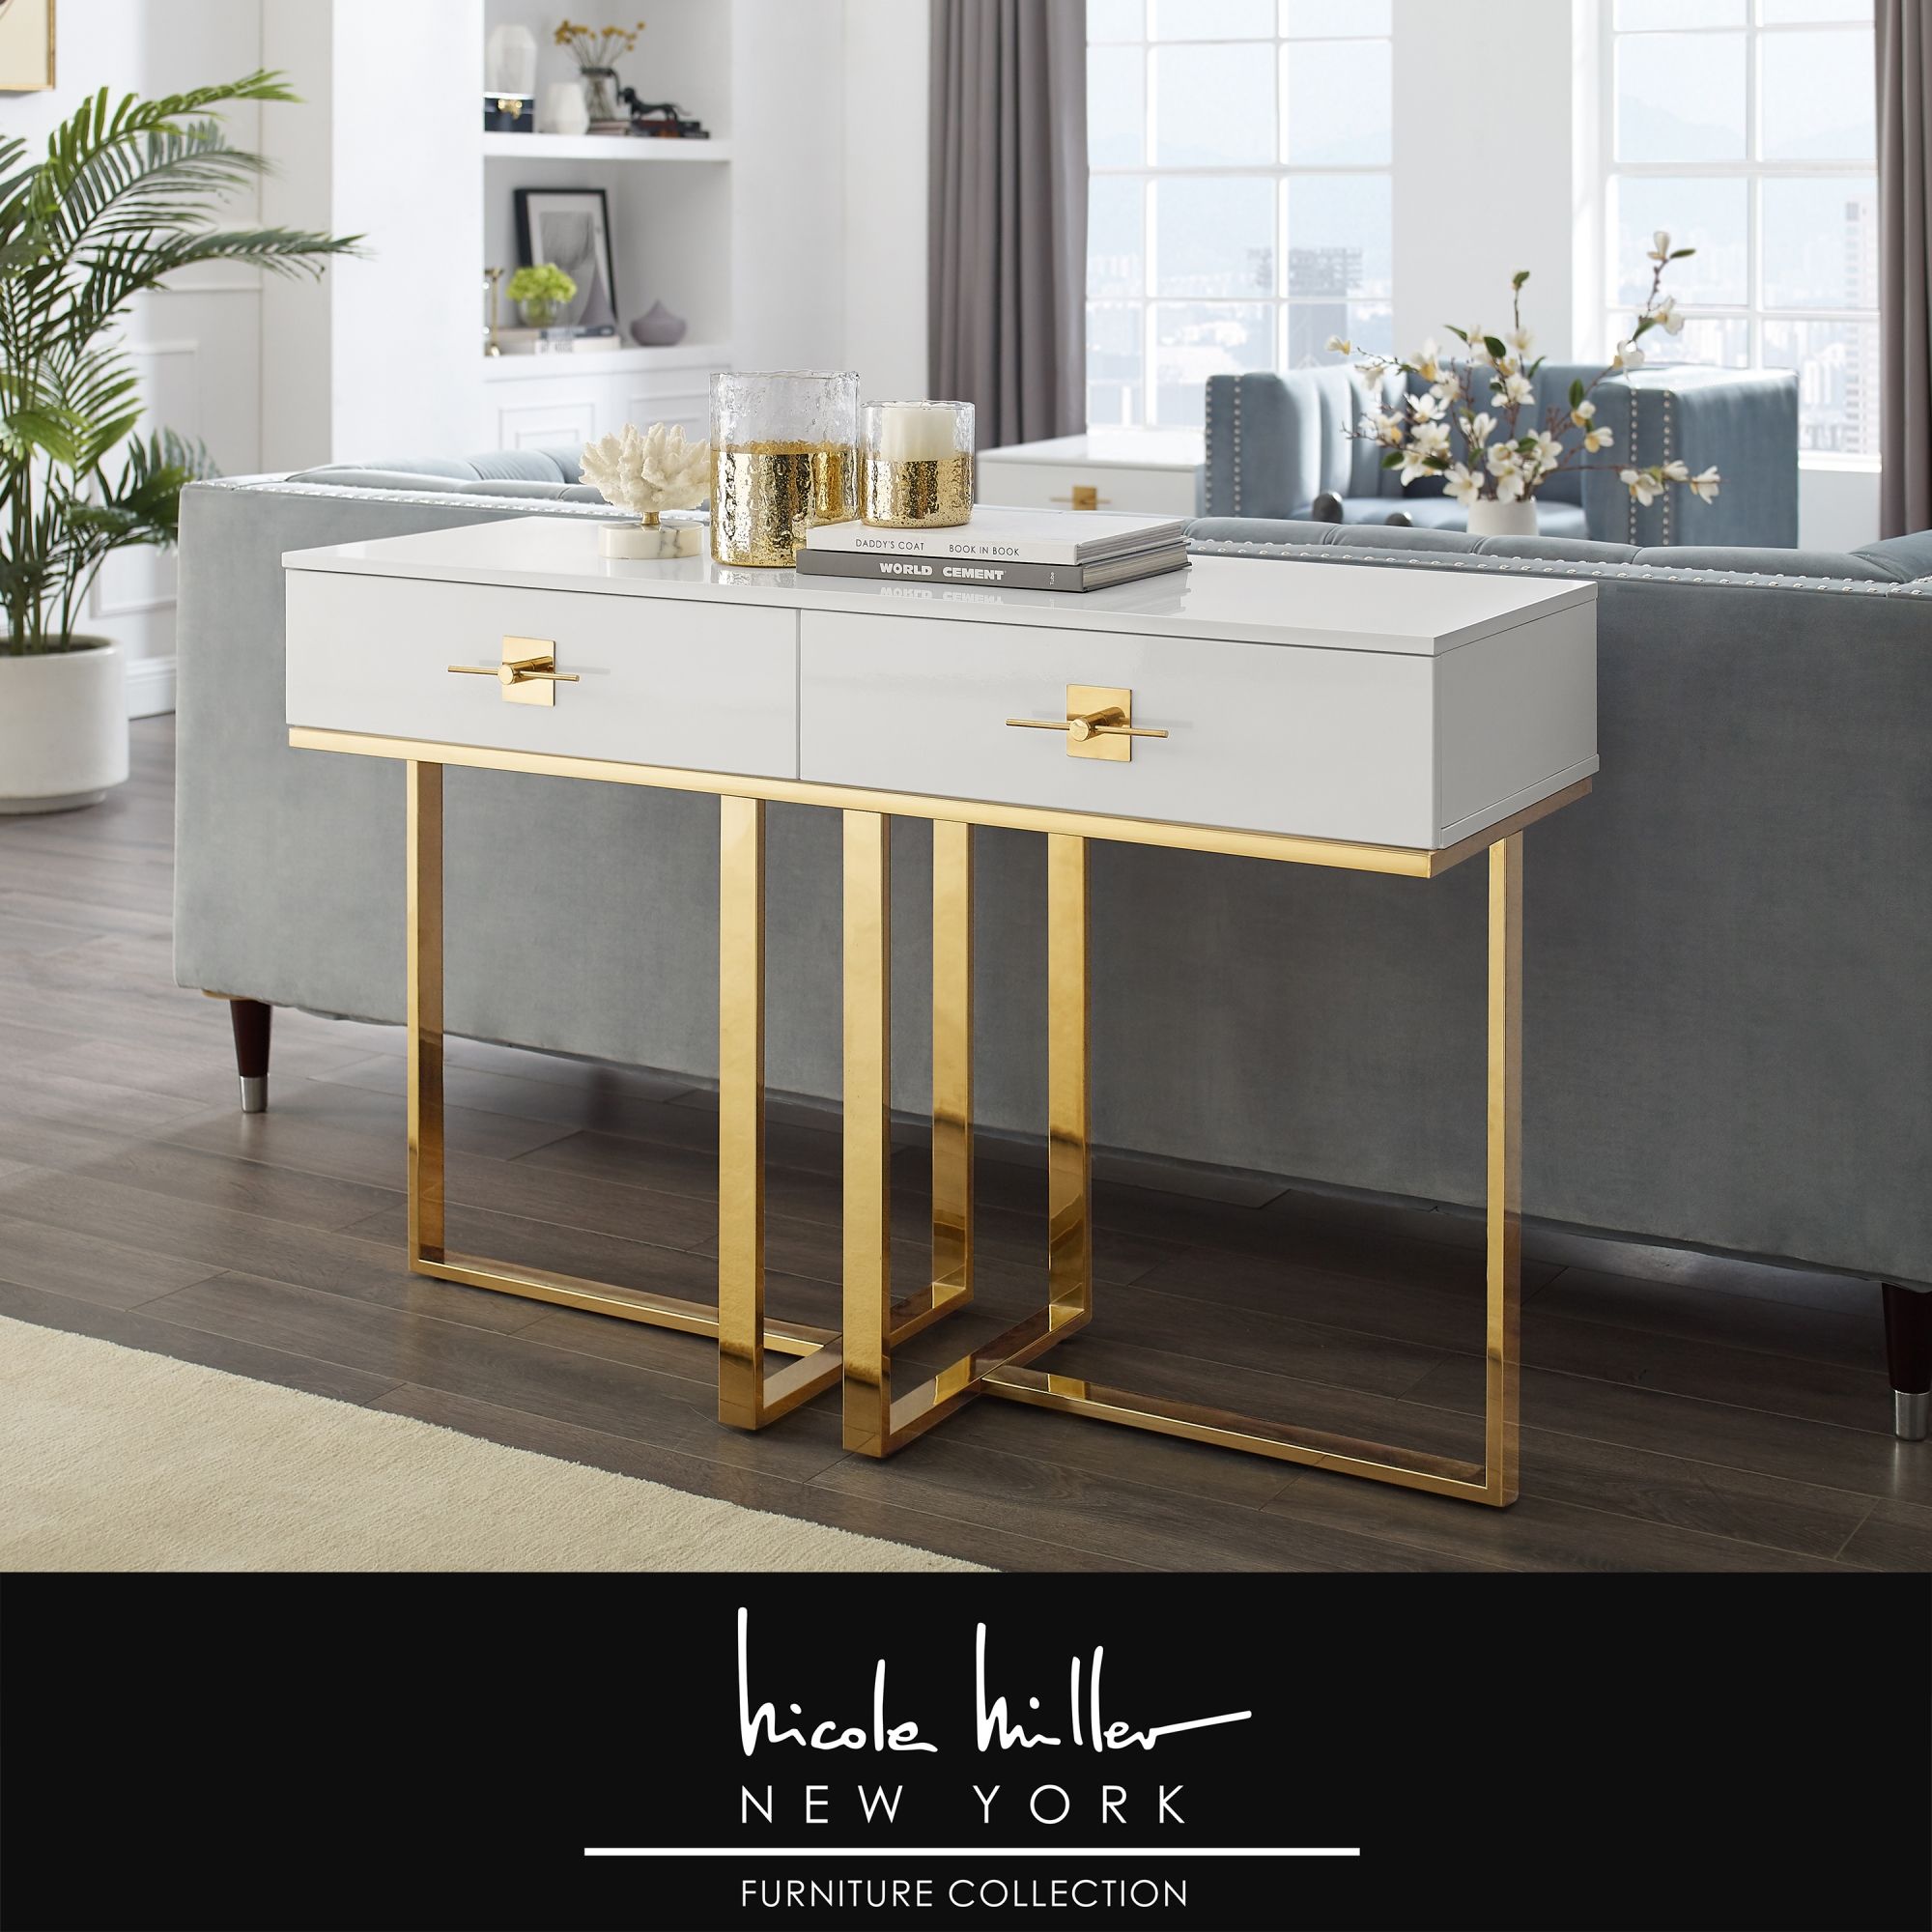 Nicole Miller Meli Console Table 2 Drawers Hight Gloss Lacquer Finish Within Metallic Gold Console Tables (View 11 of 20)